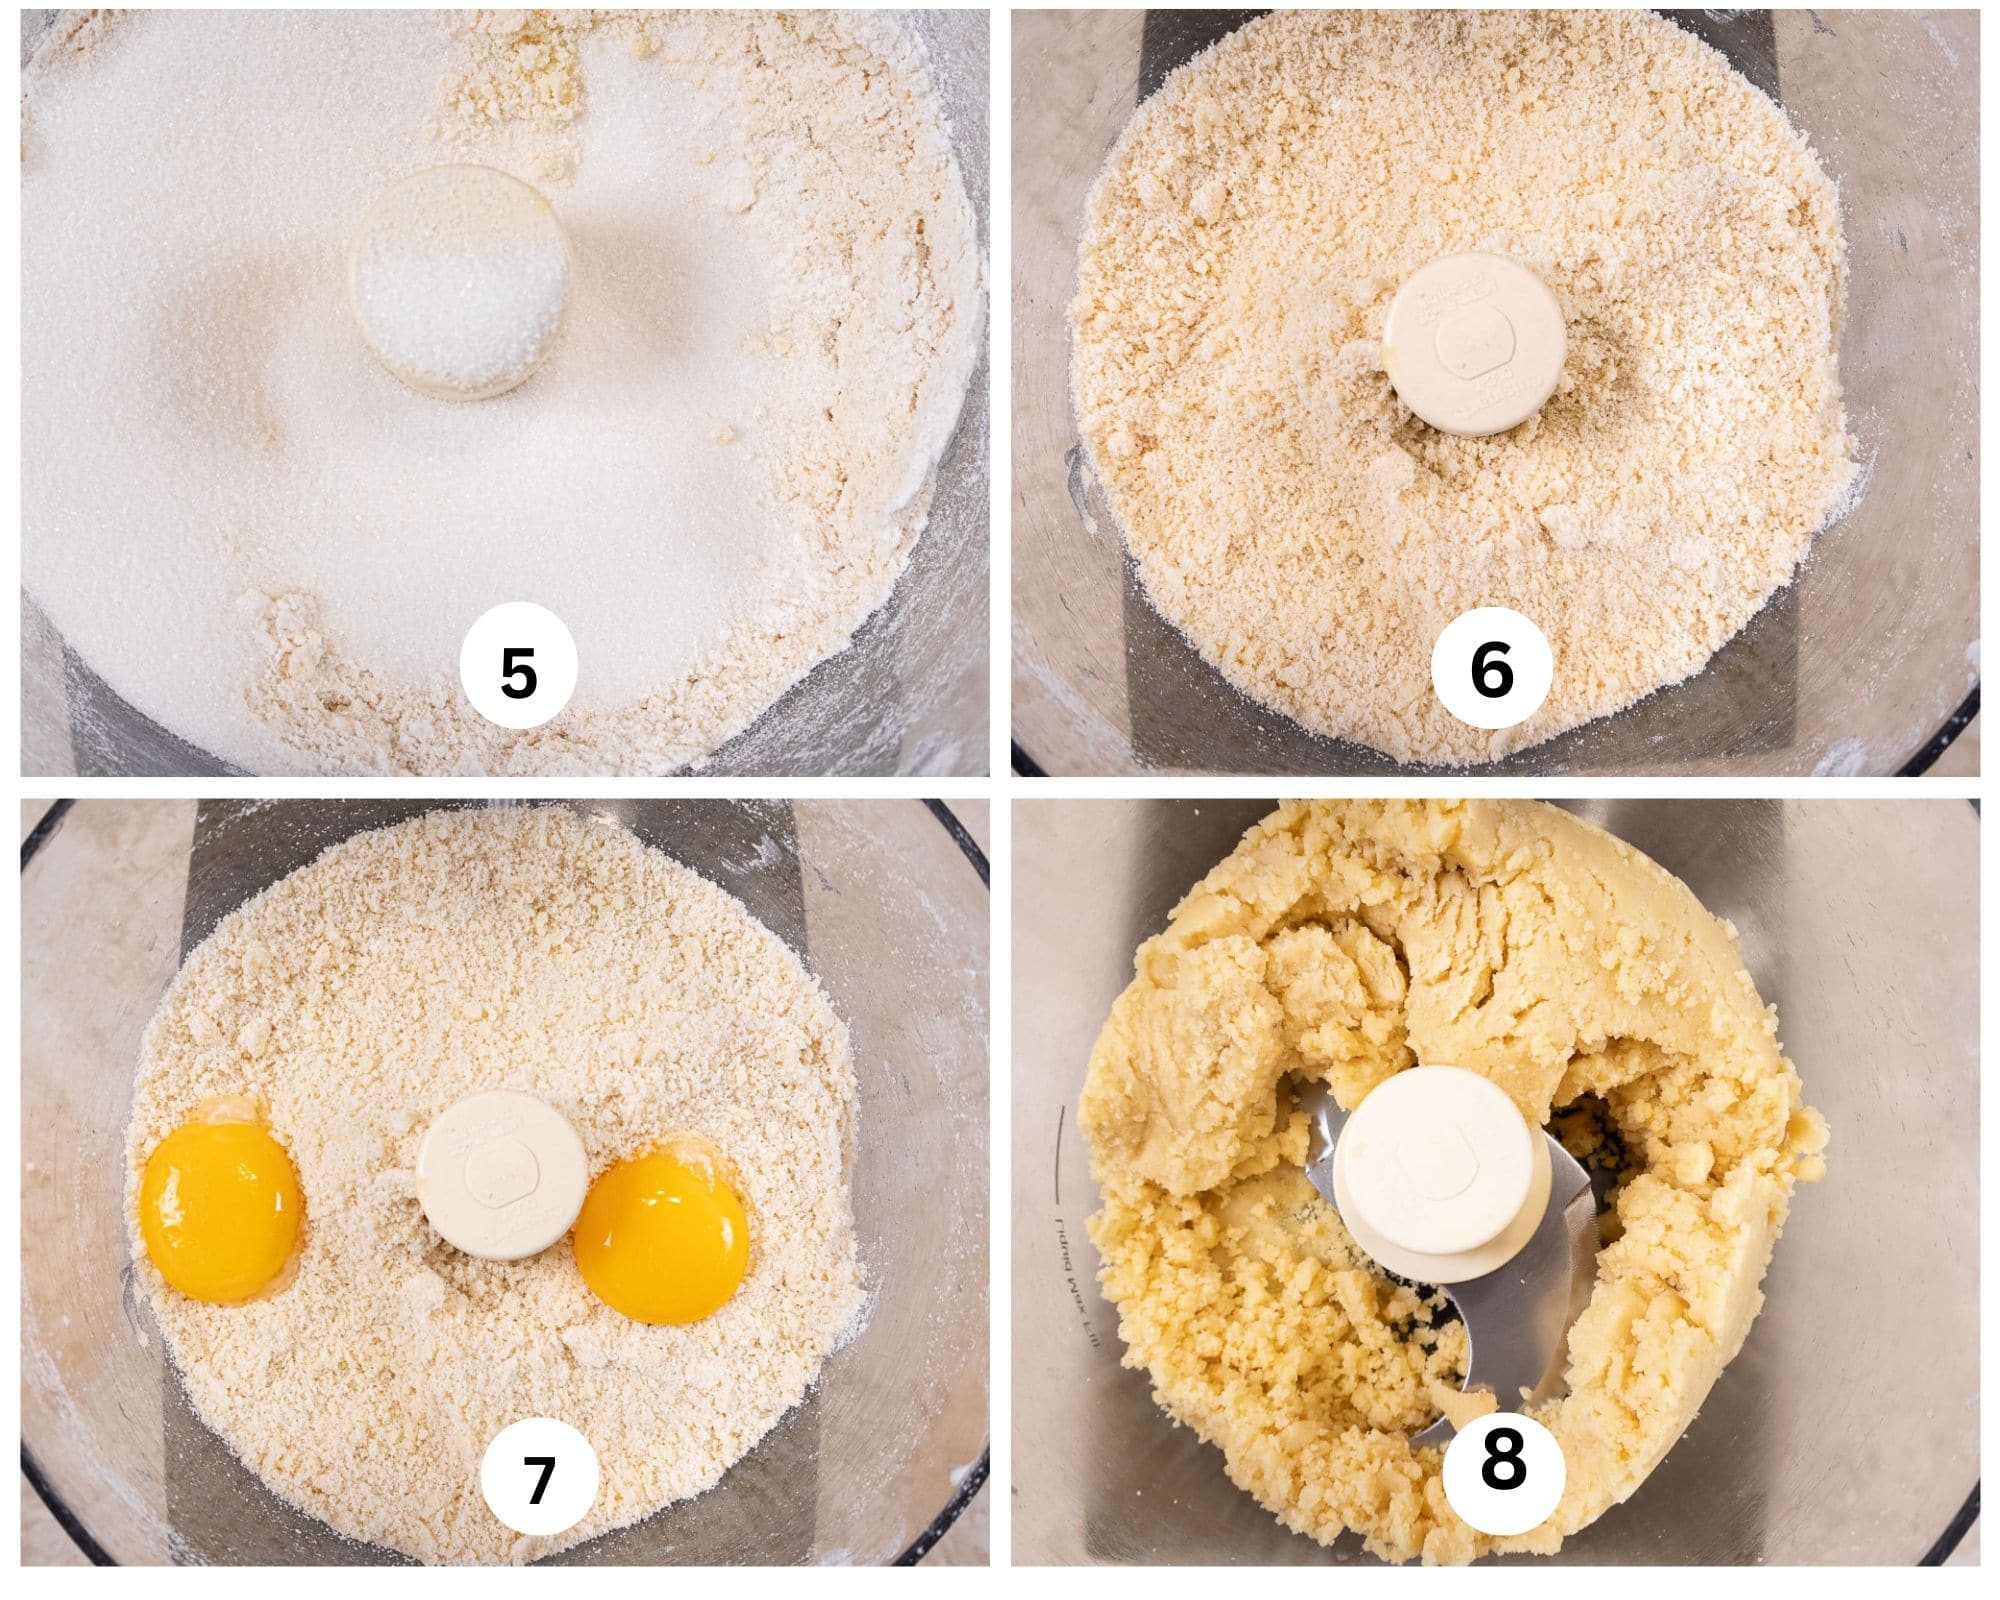 This collage shows the sugar being added to the process, after it is processed, the egg yolks added and the dough completed.